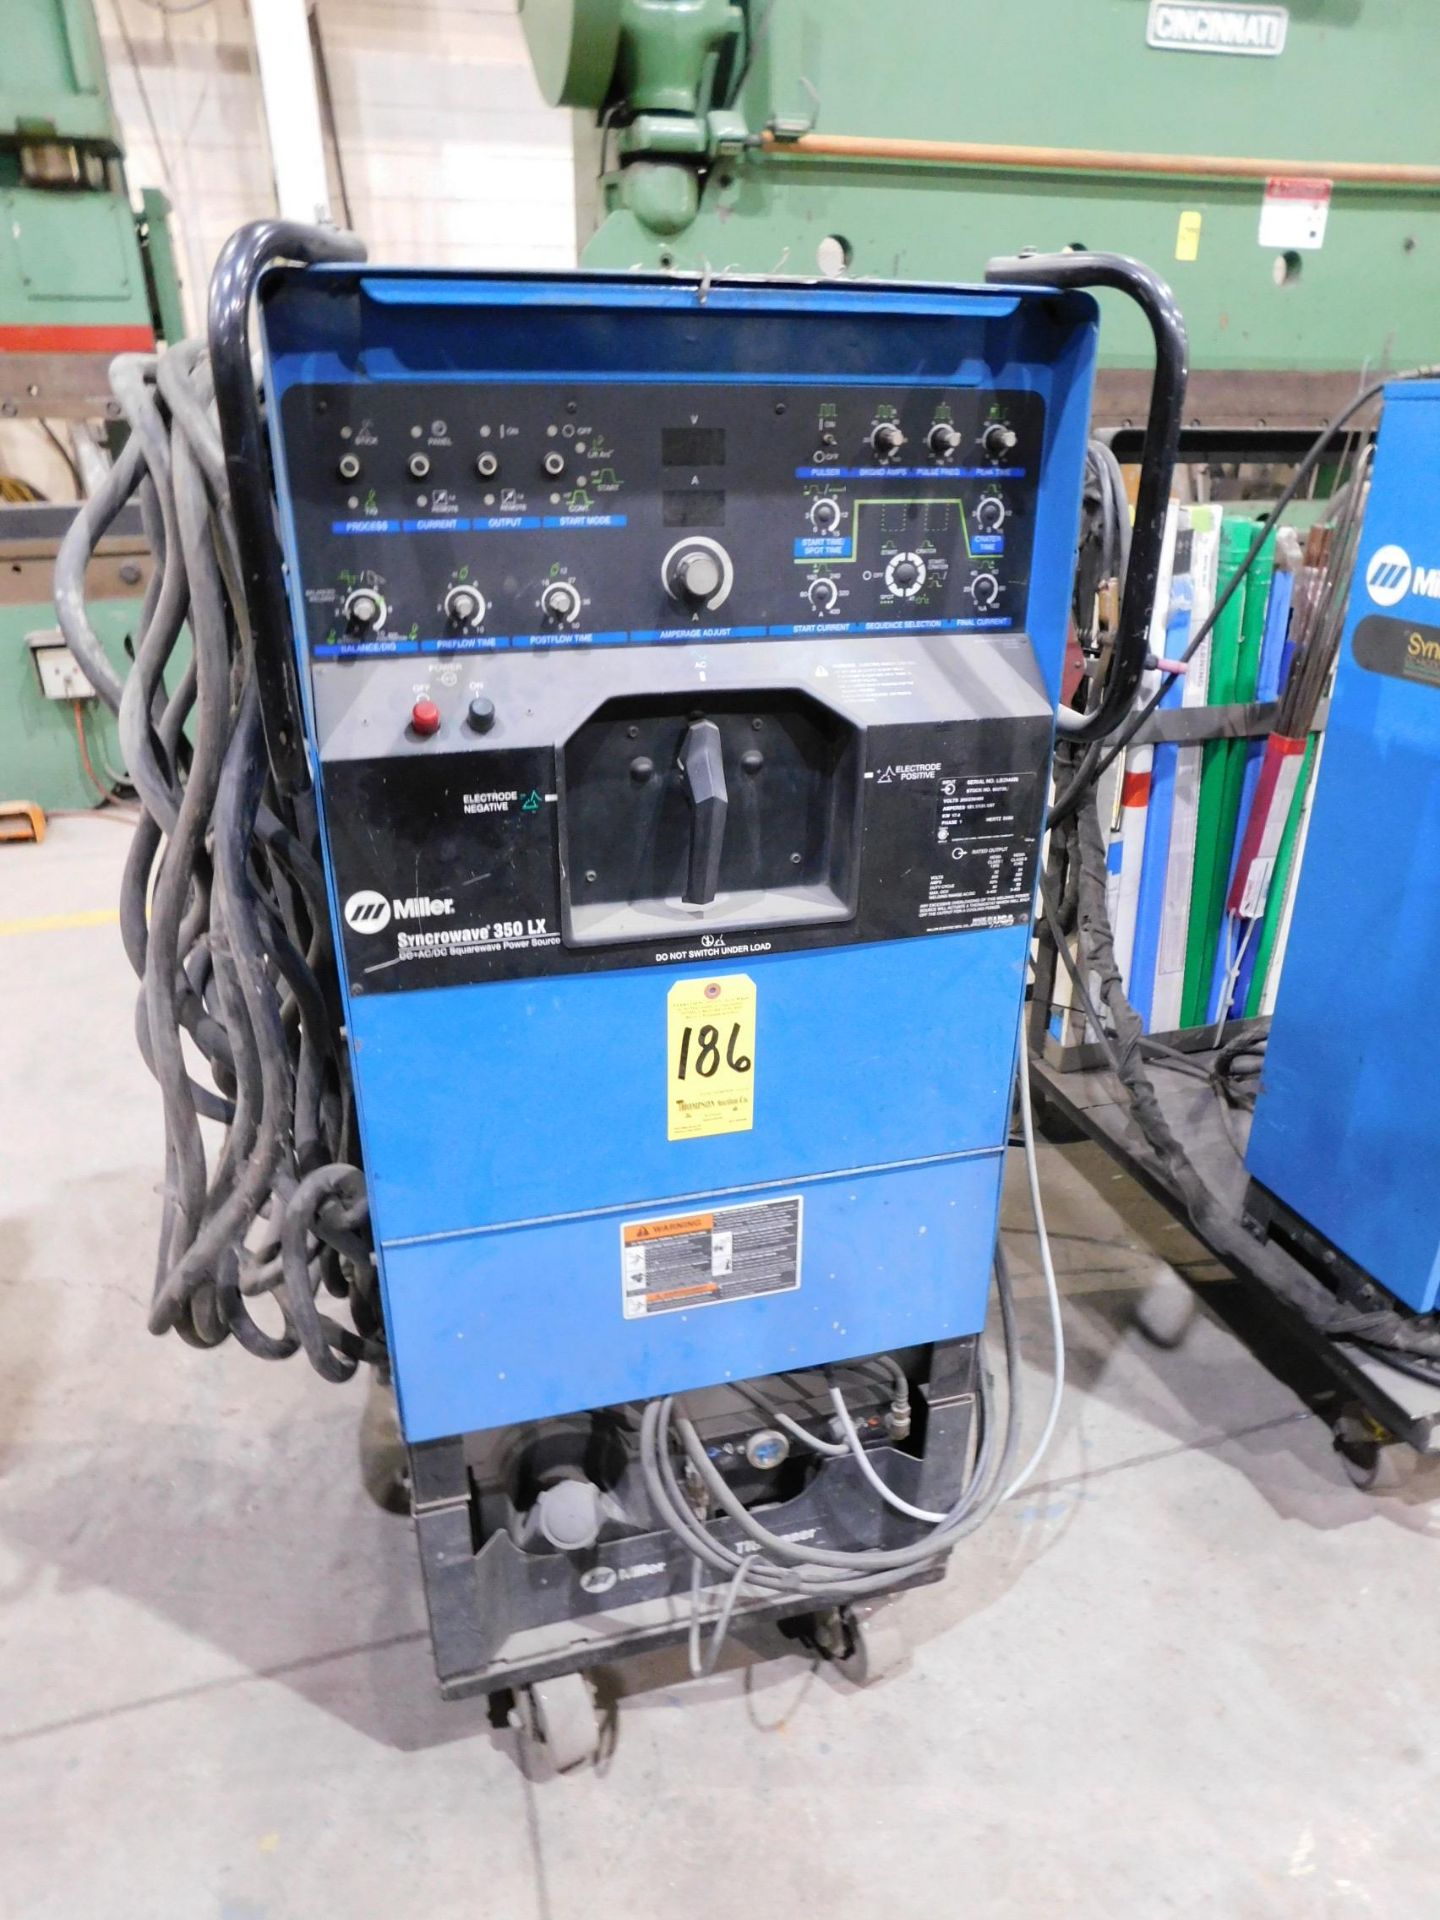 Miller Synchrowave 350LX Tig Welder, s/n LB294456, with Built in Chiller, Torch Ground Cable,